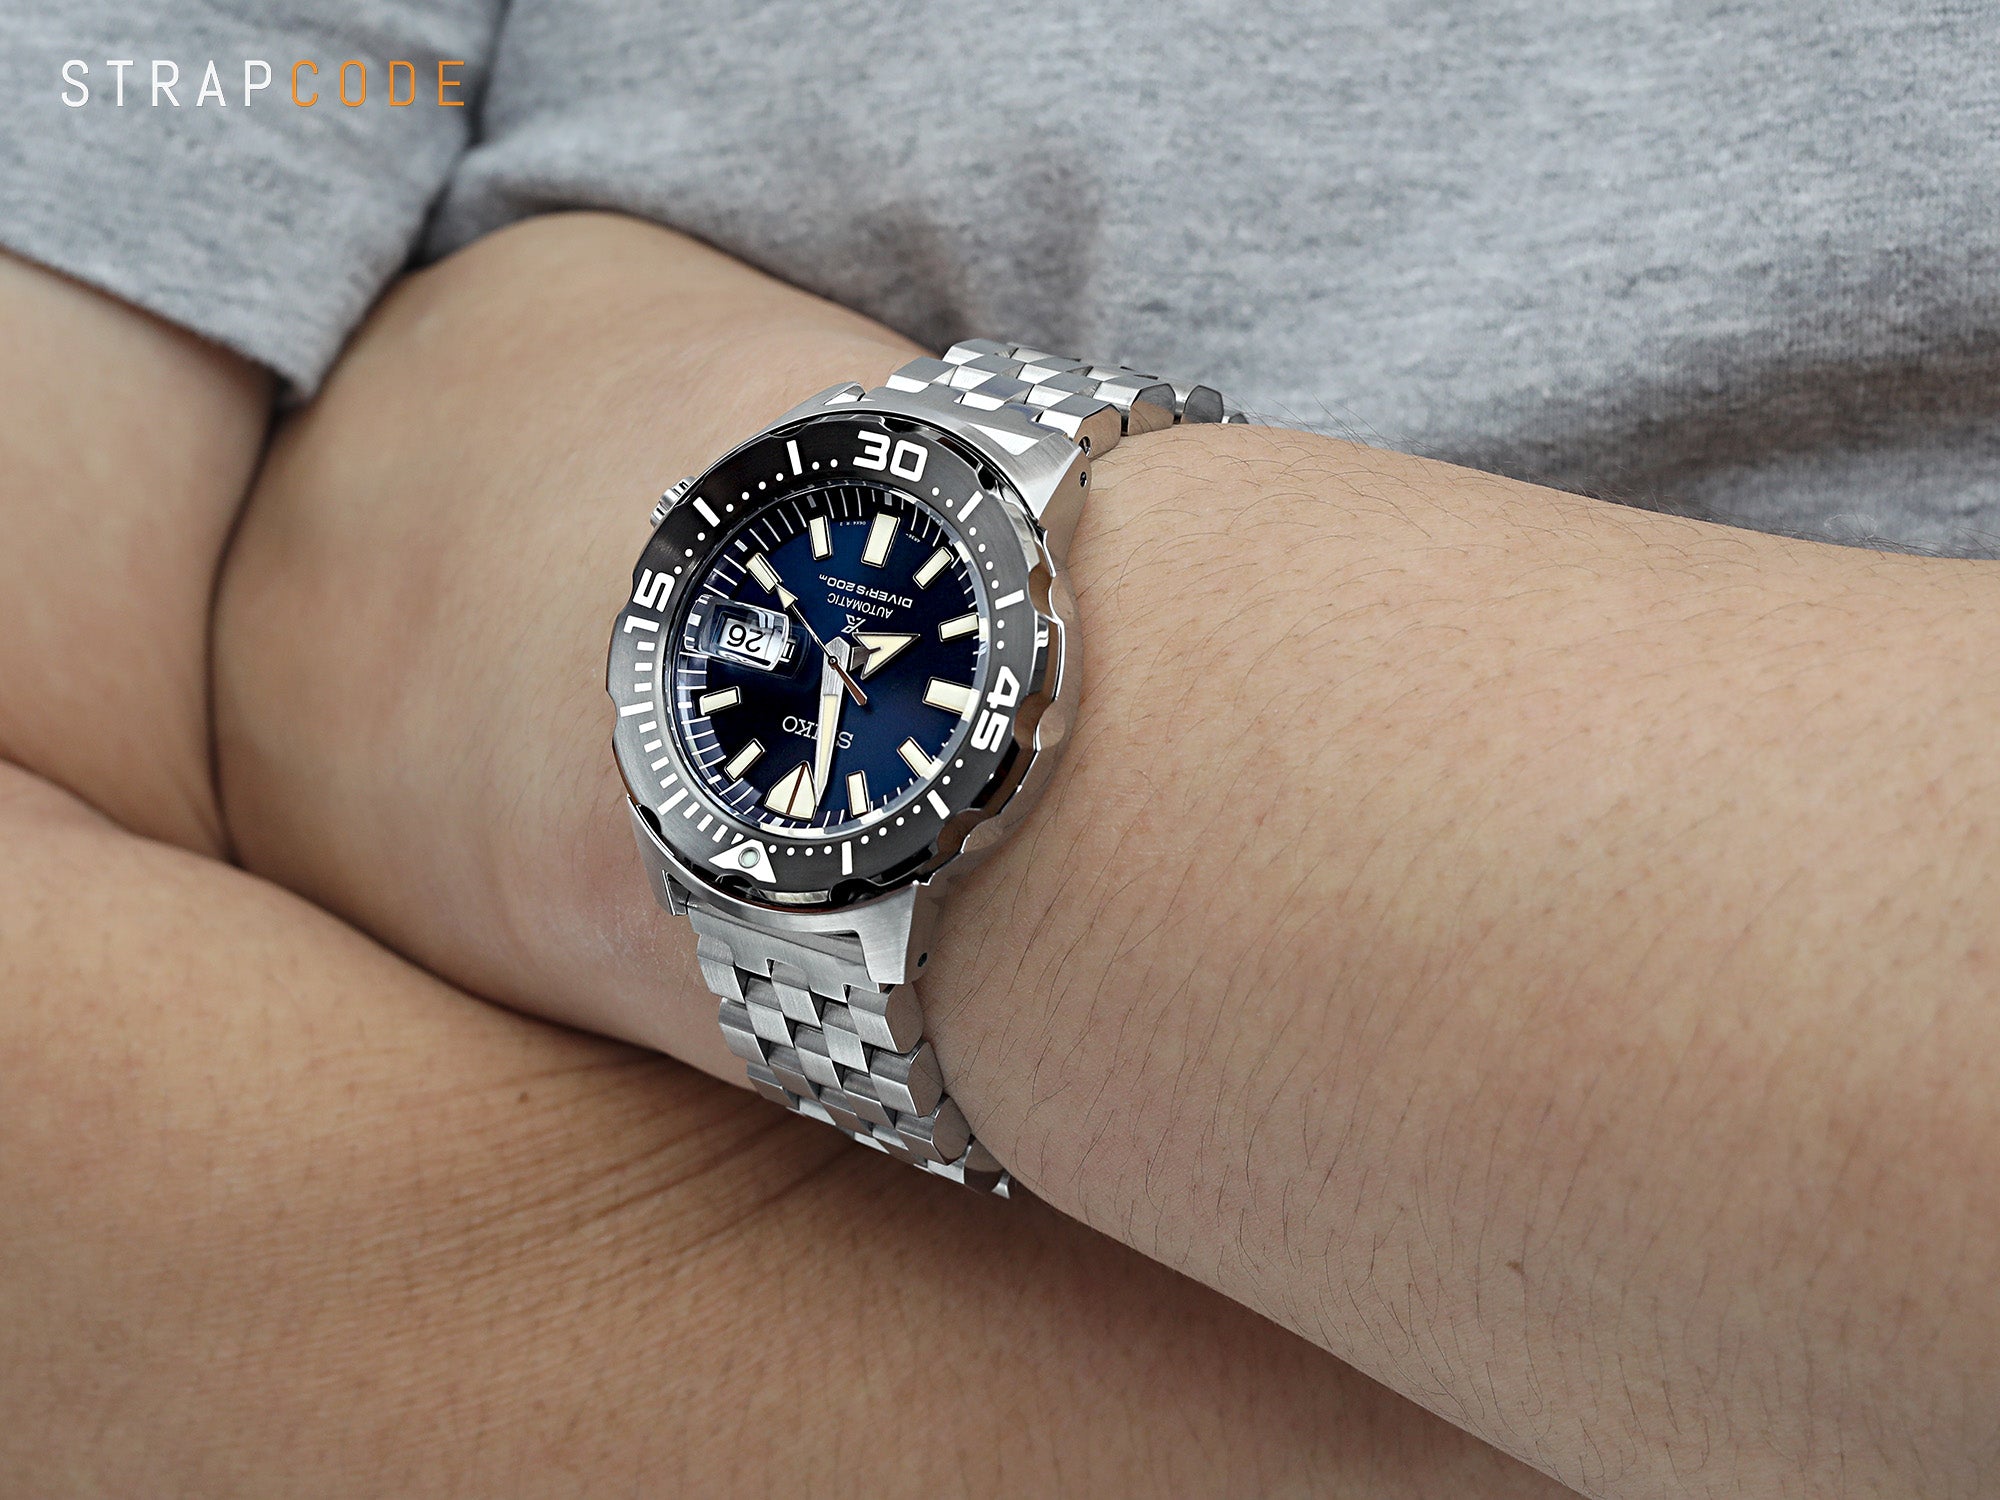 Seiko's Latest “MONSTER” Dive Watch SRPD25 | Strapcode